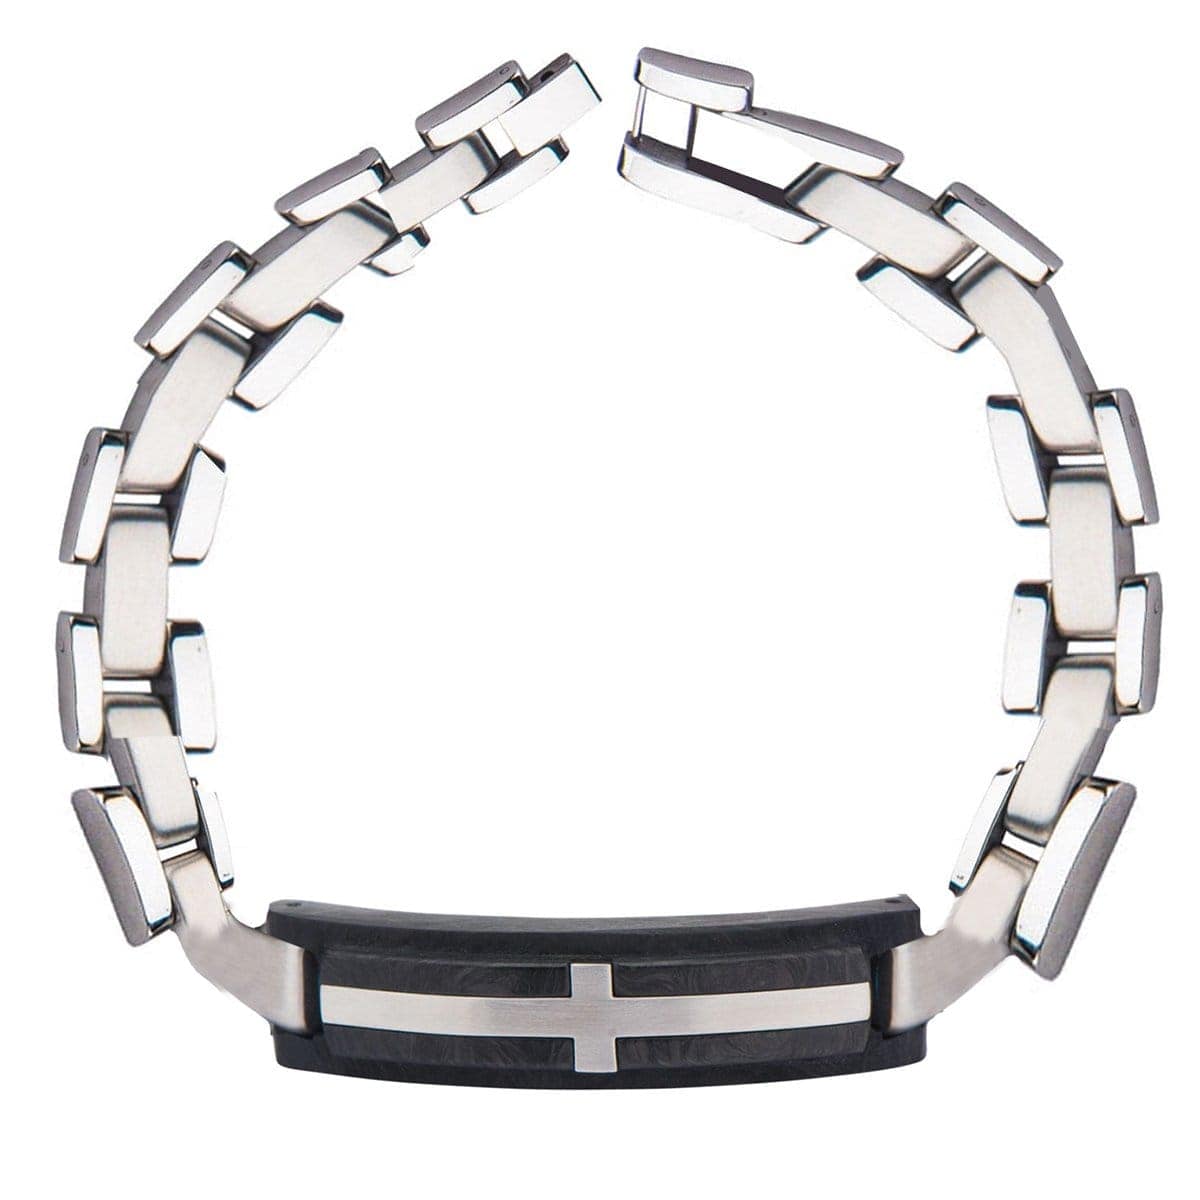 INOX JEWELRY Bracelets Silver Tone Stainless Steel and Black Carbon Graphite with Inlayed Cross ID Bracelet BRCF0015